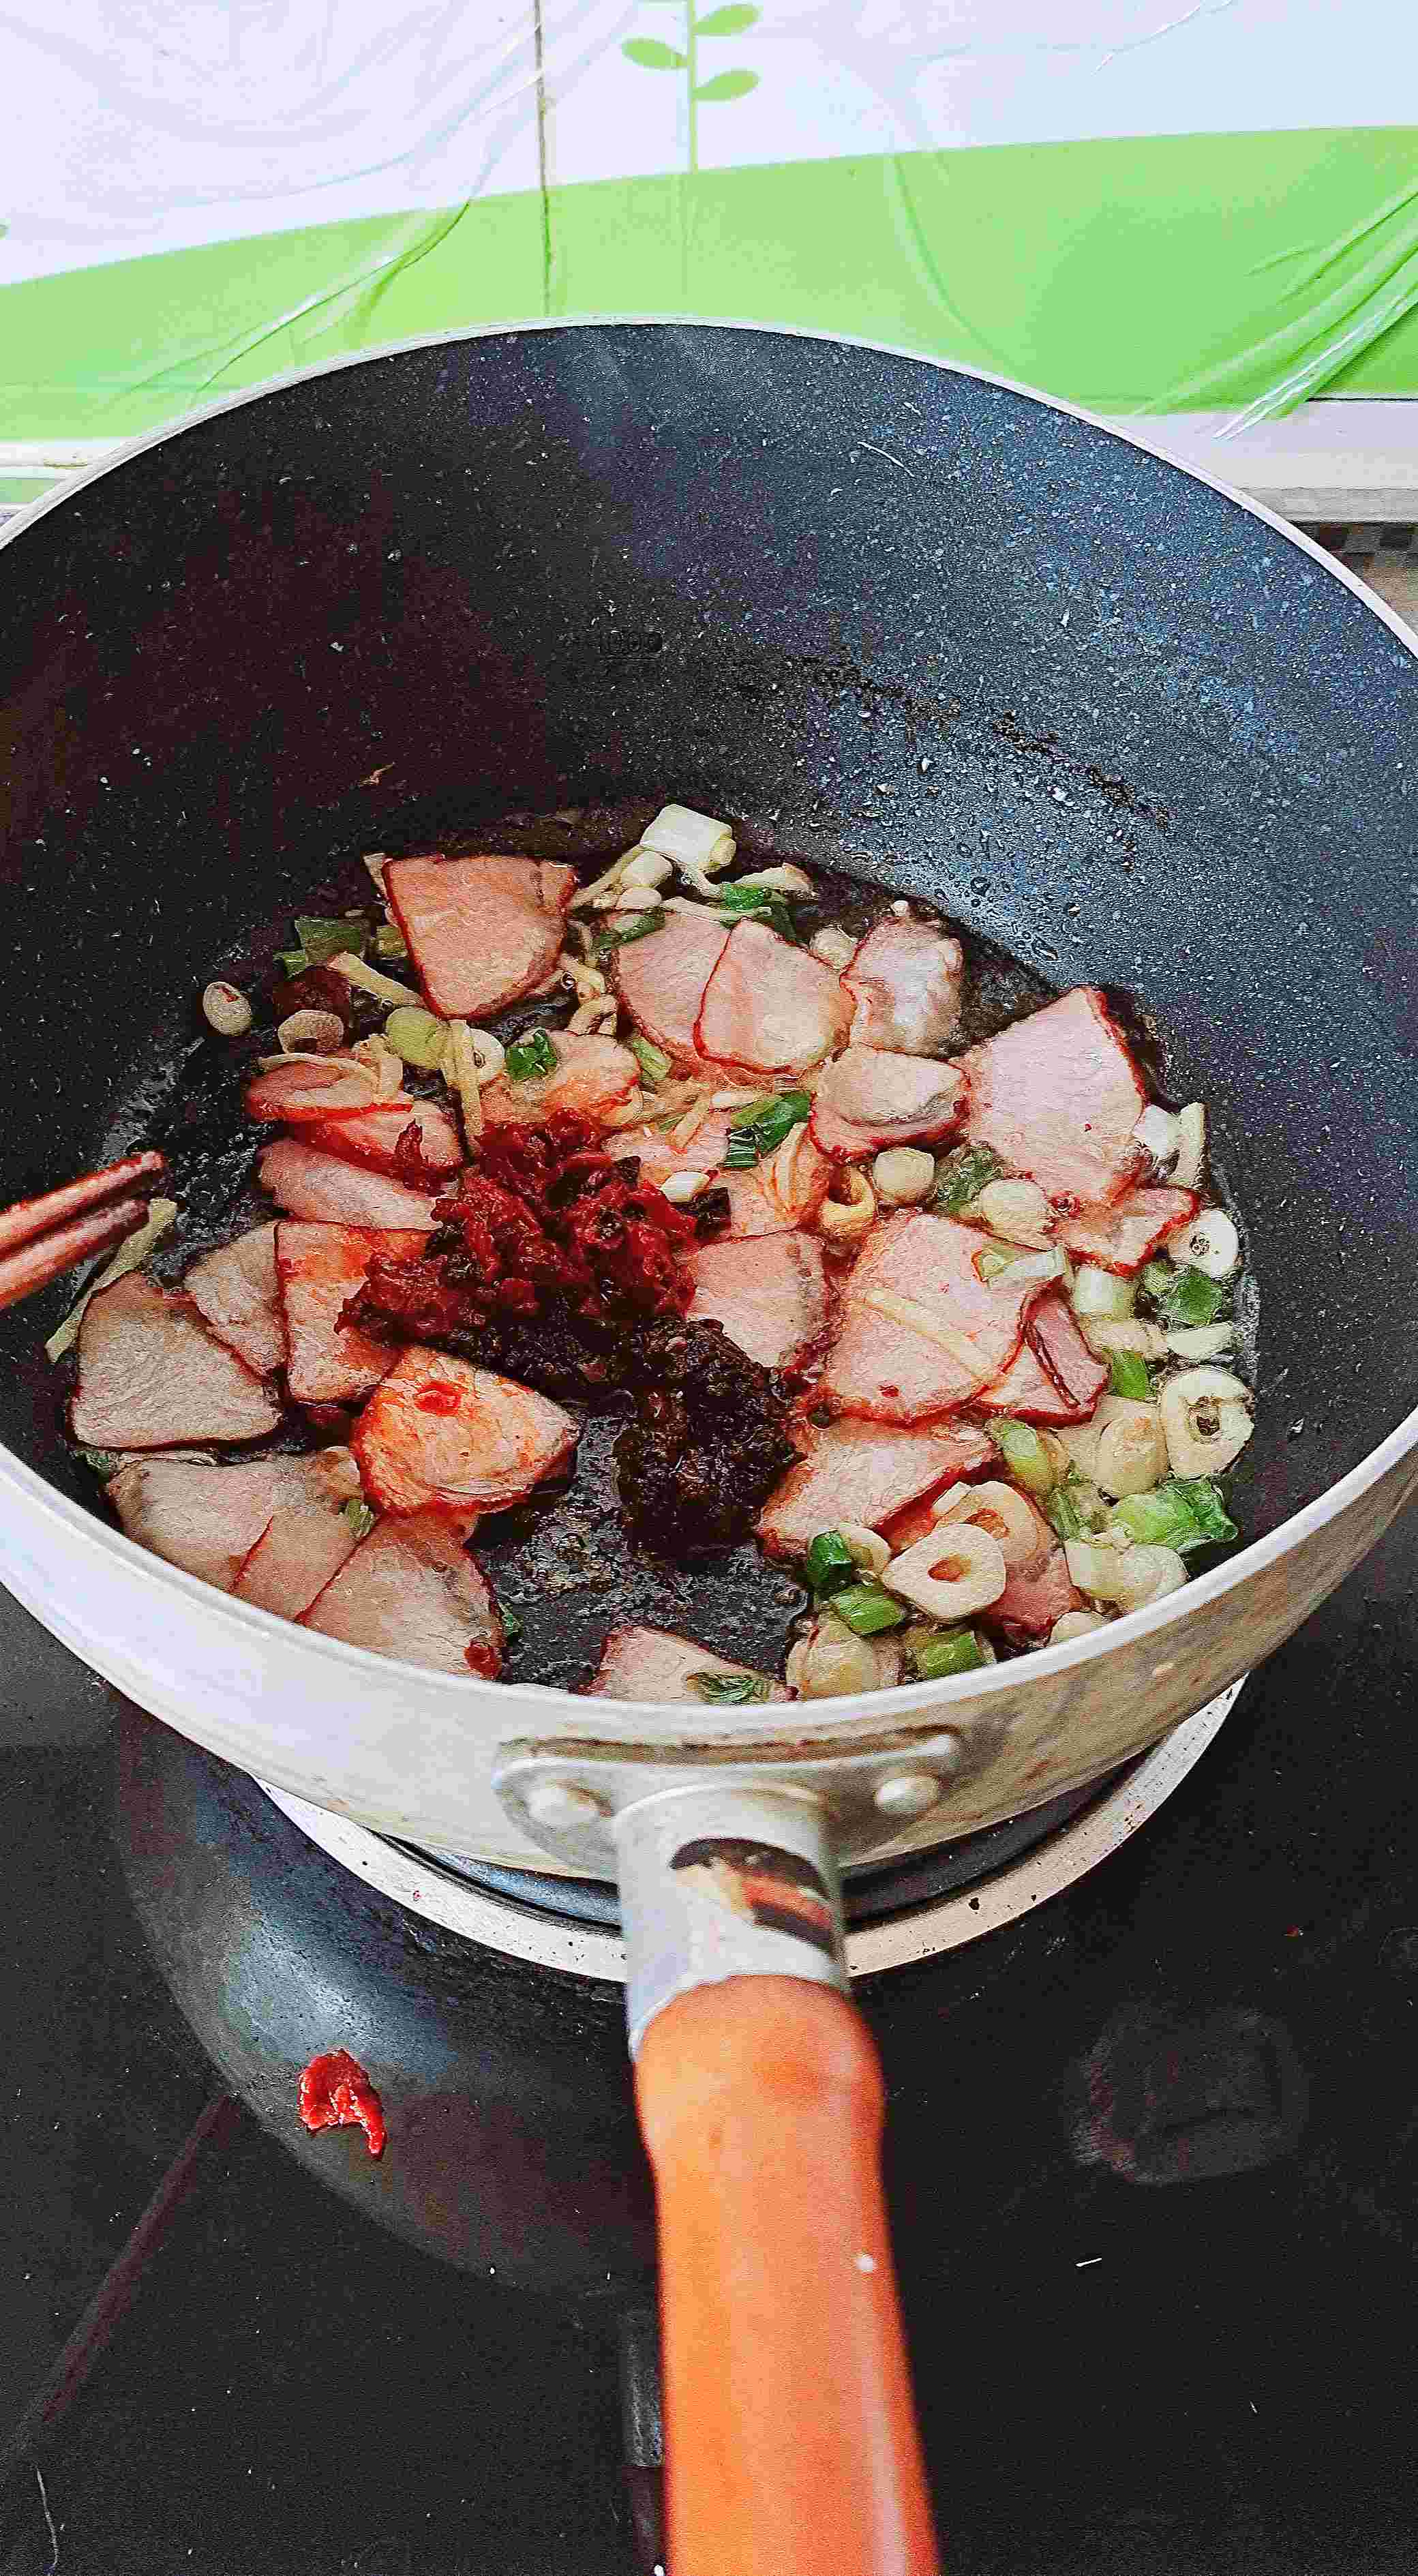 Dry and Fresh Meals, You Can Get Three Bowls of Rice~dry Pot Bacon with Tea Tree Mushrooms recipe